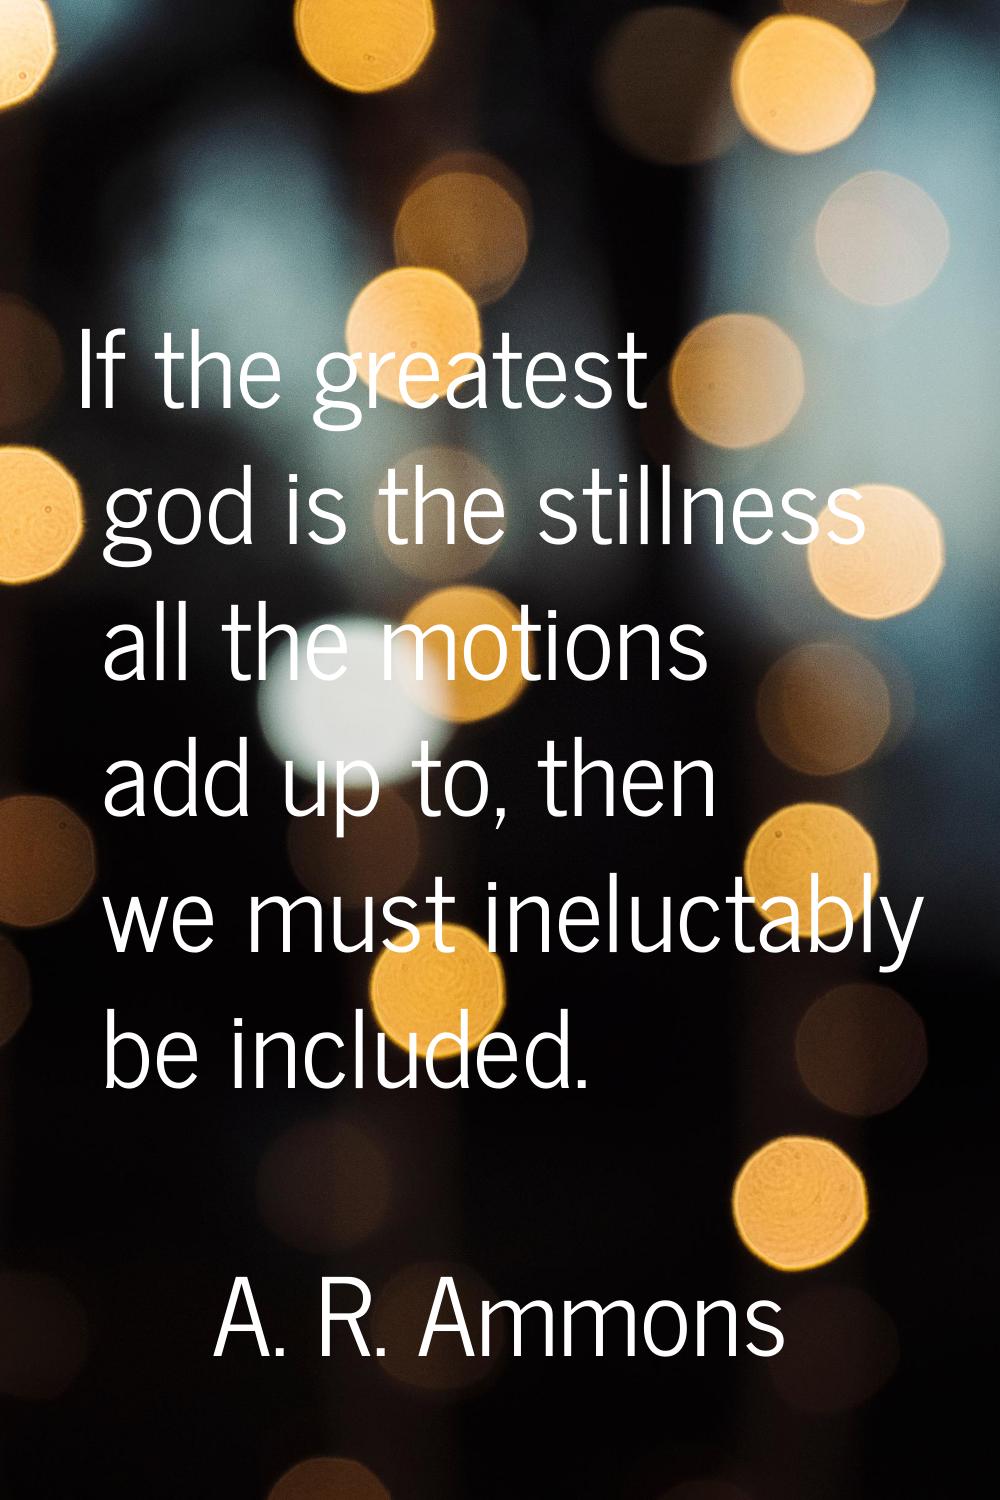 If the greatest god is the stillness all the motions add up to, then we must ineluctably be include